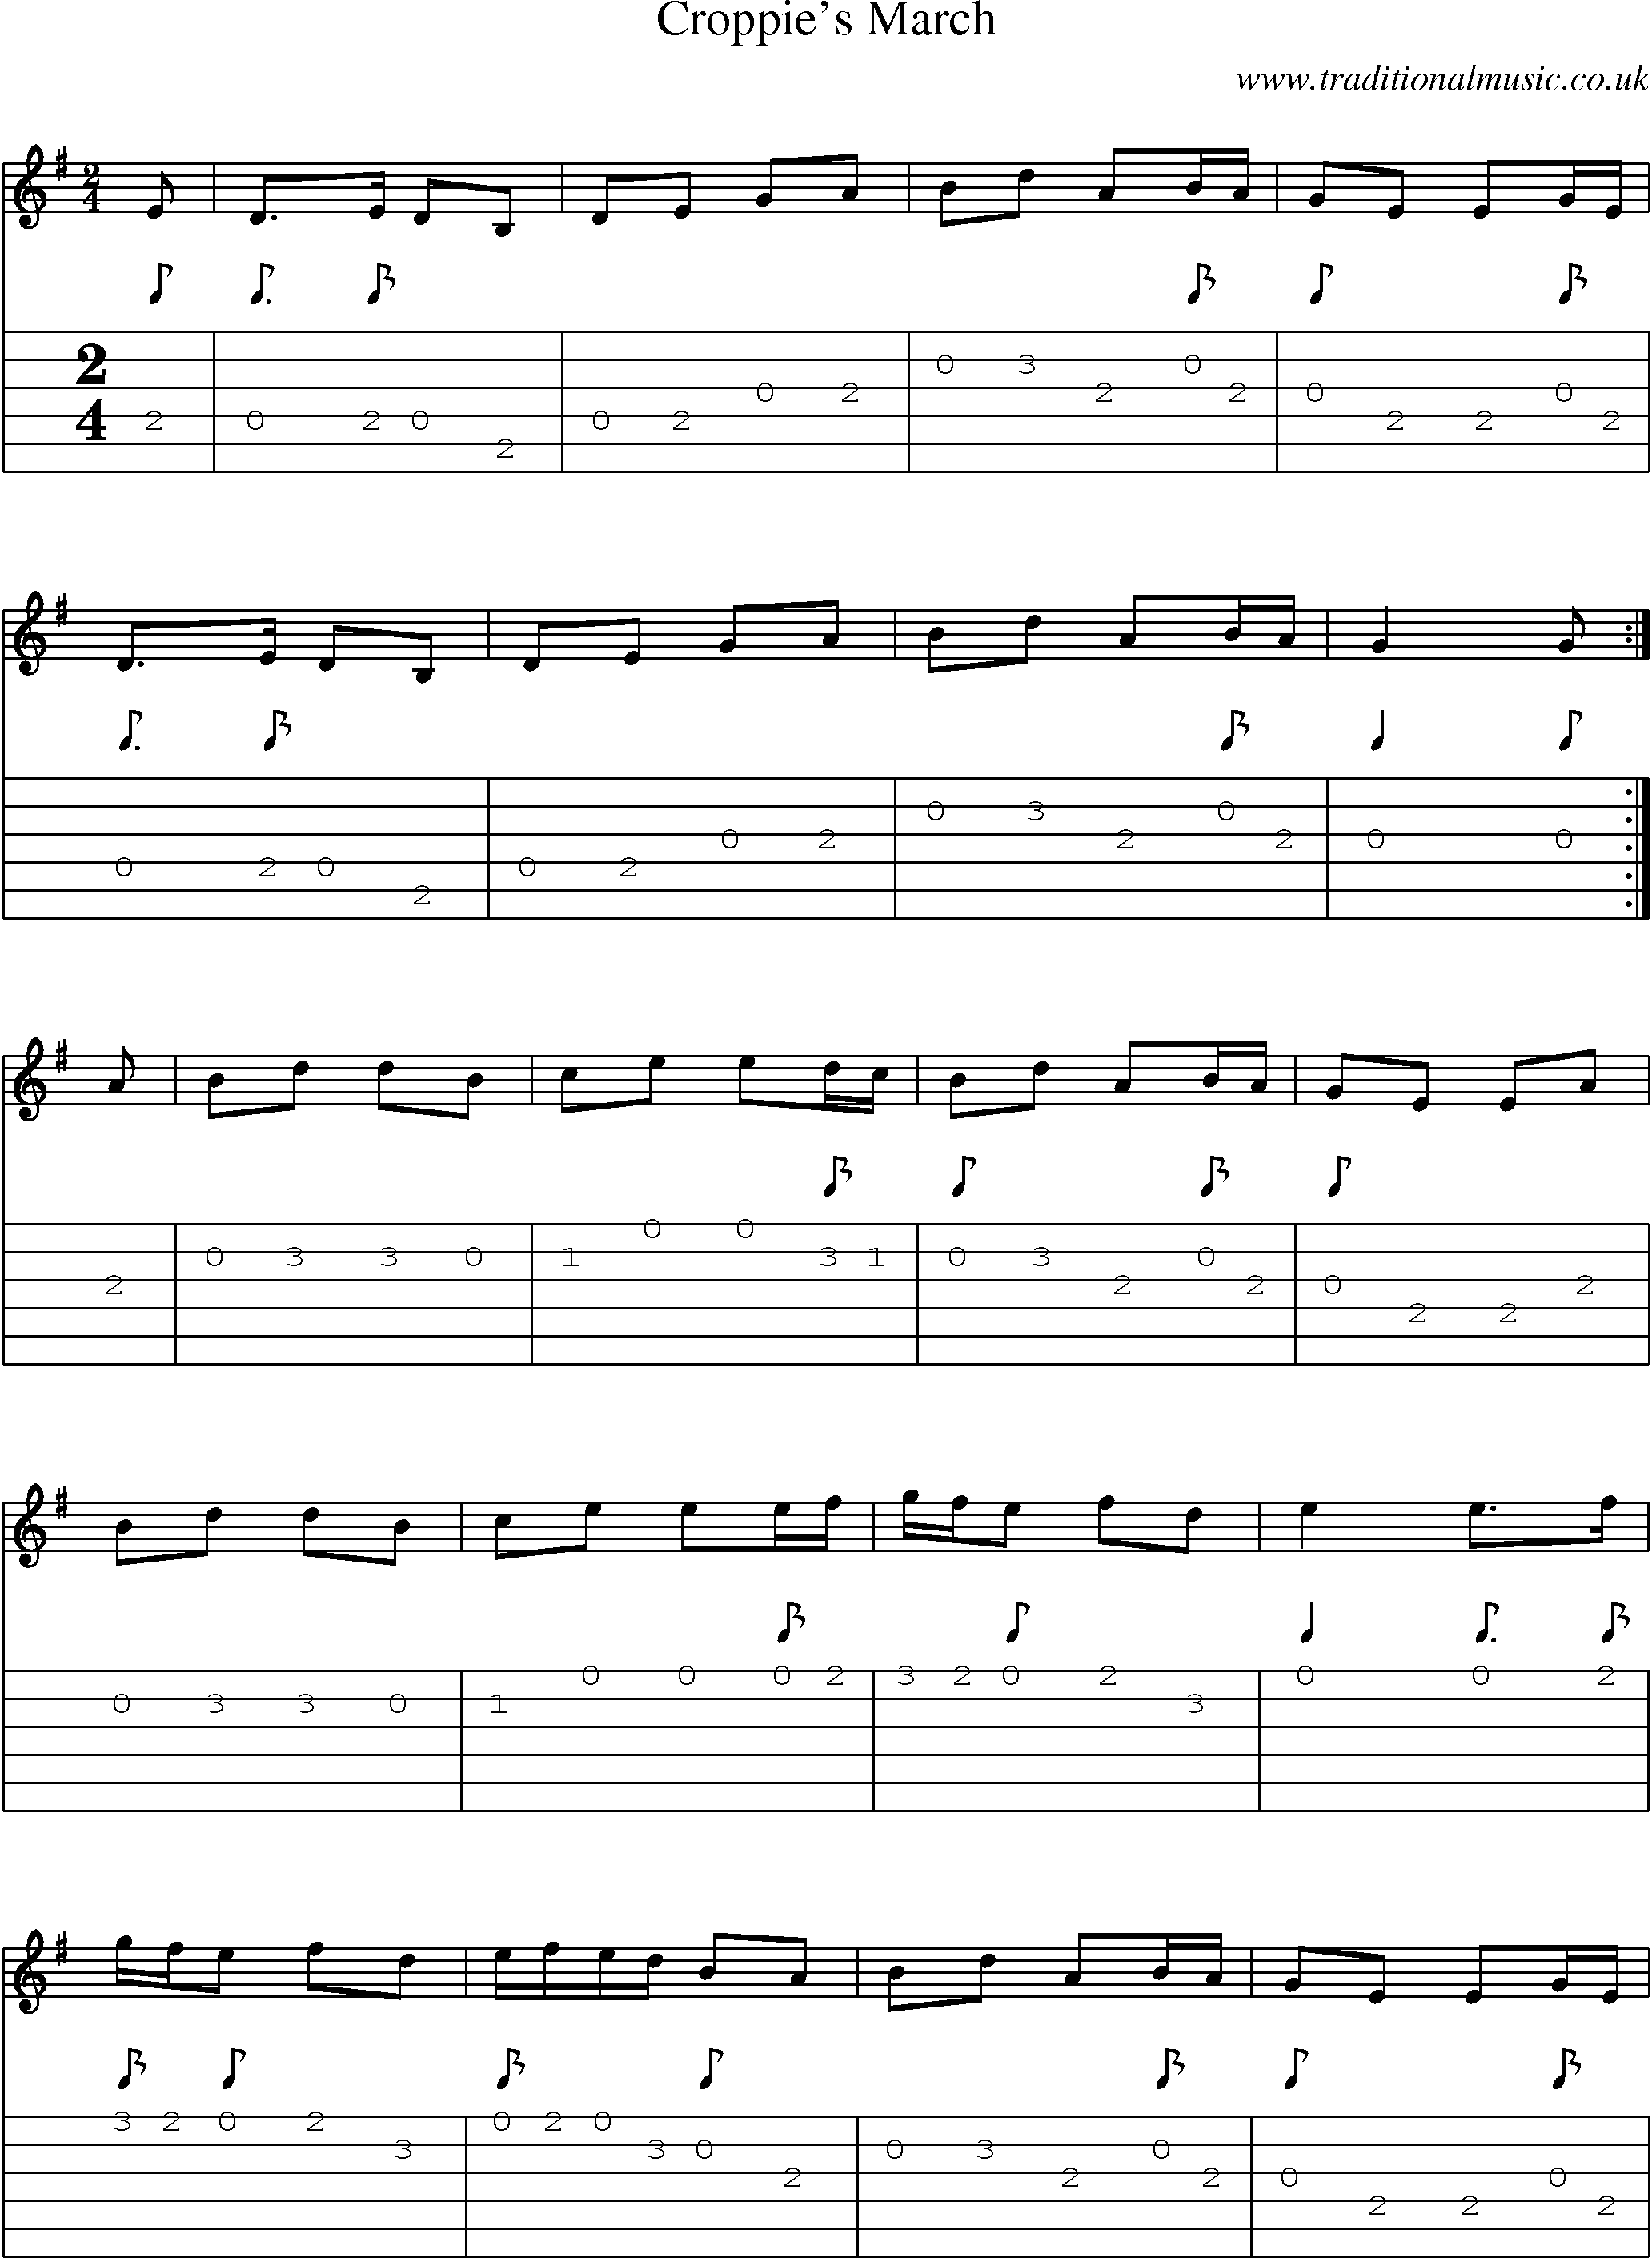 Music Score and Guitar Tabs for Croppies March